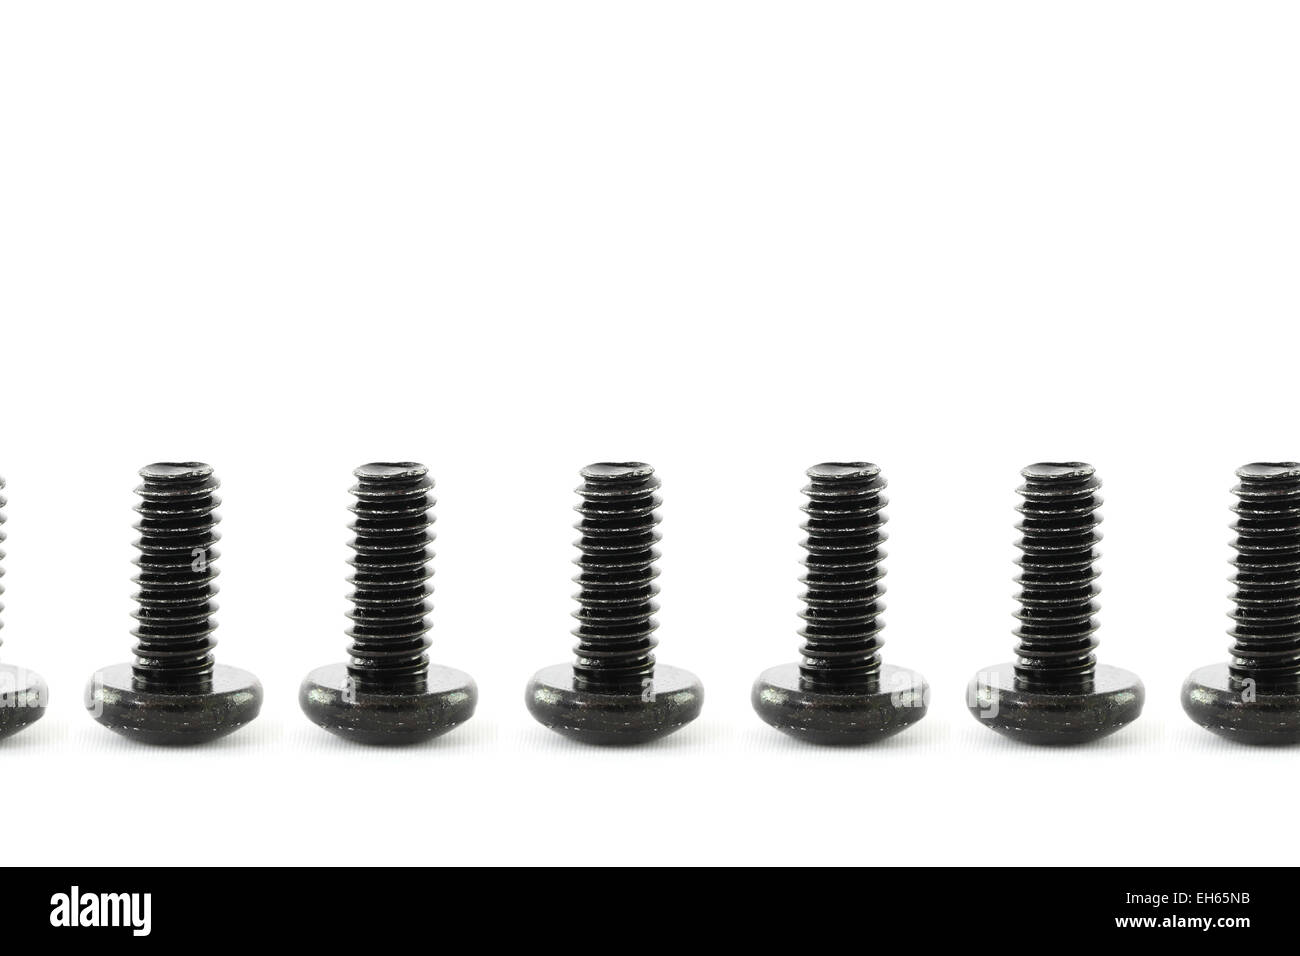 The metal bolts on white background. Stock Photo